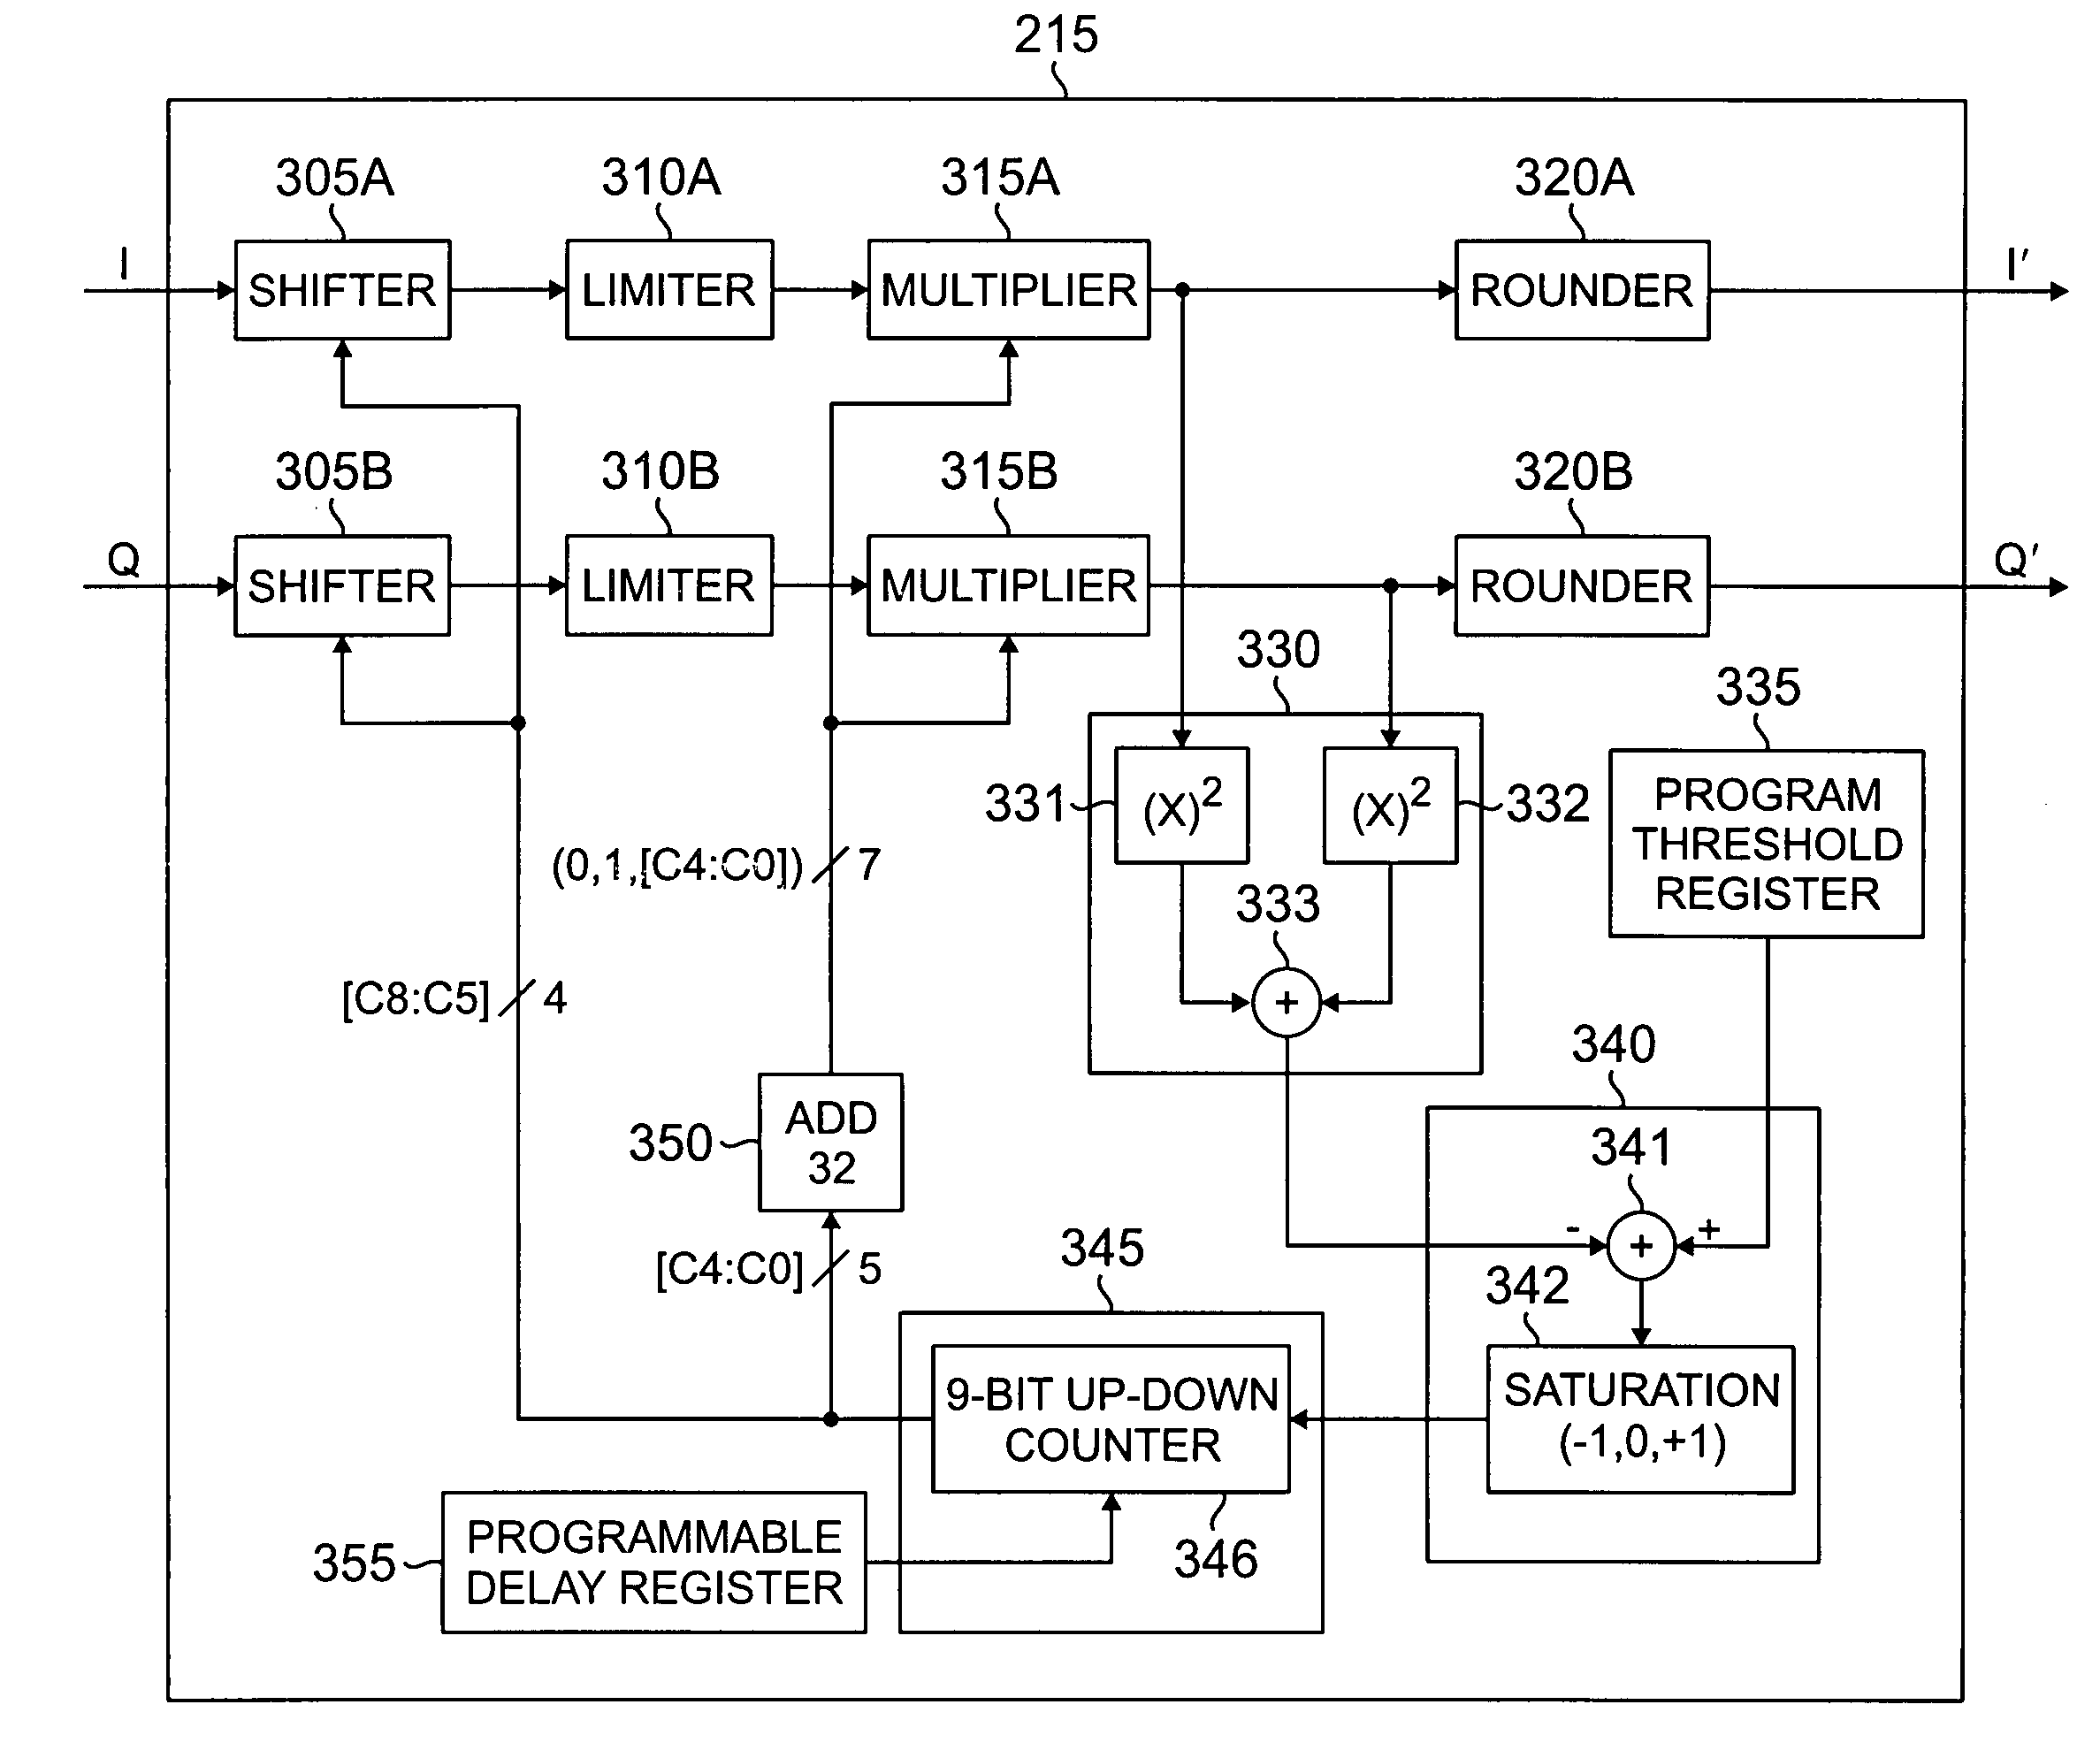 Fully digital AGC circuit with wide dynamic range and method of operation